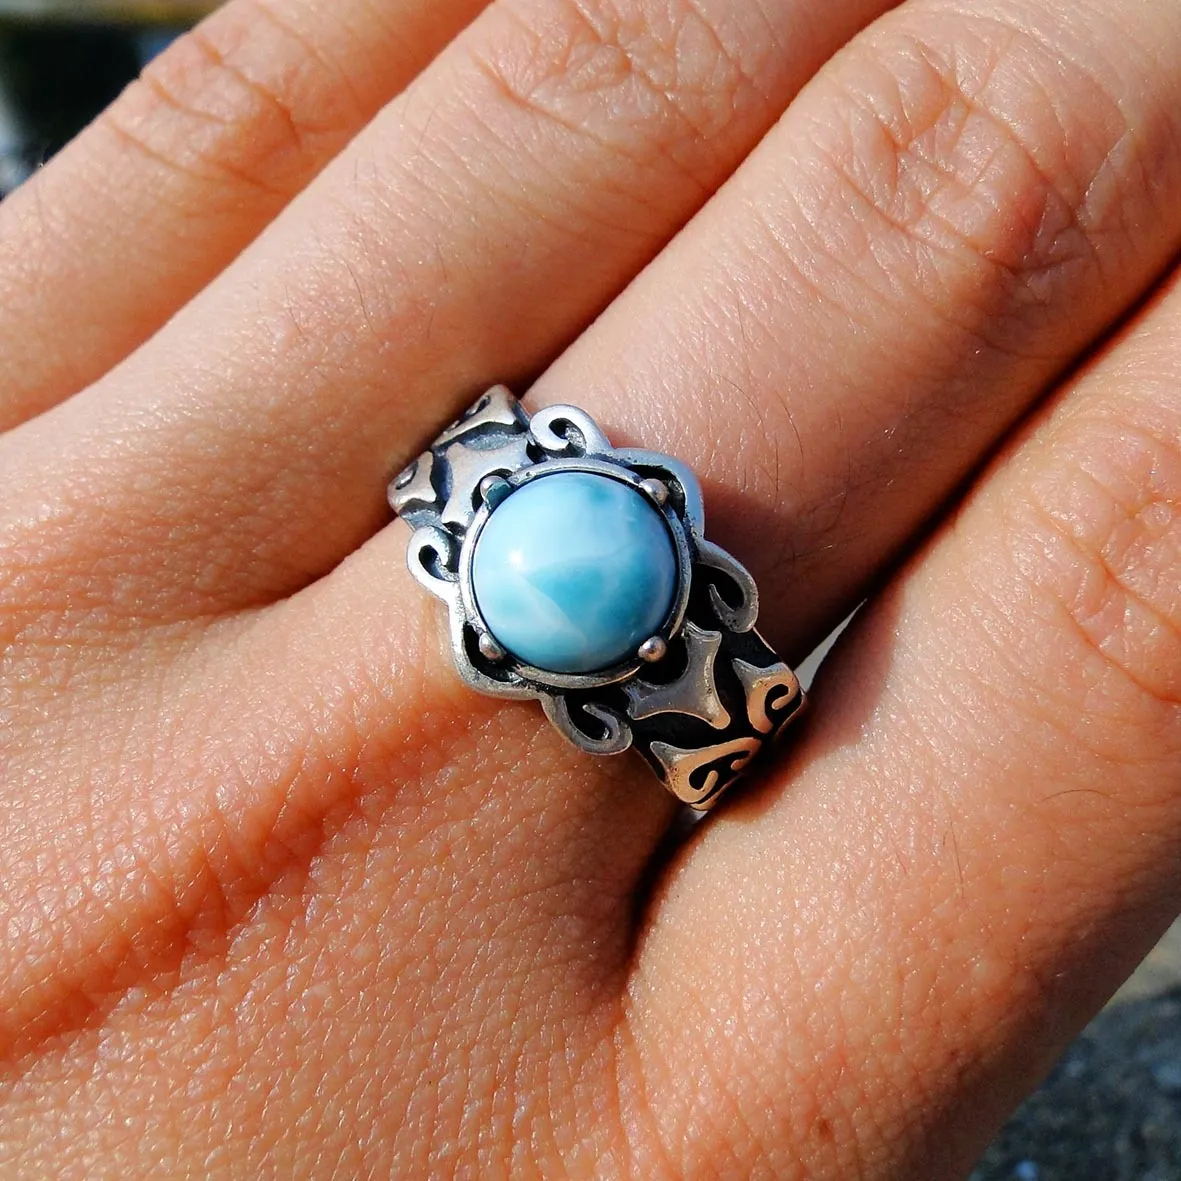 Whole Handmade 925 Sterling Silver Antique Vintage 8mm Larimar Jewelry Rings